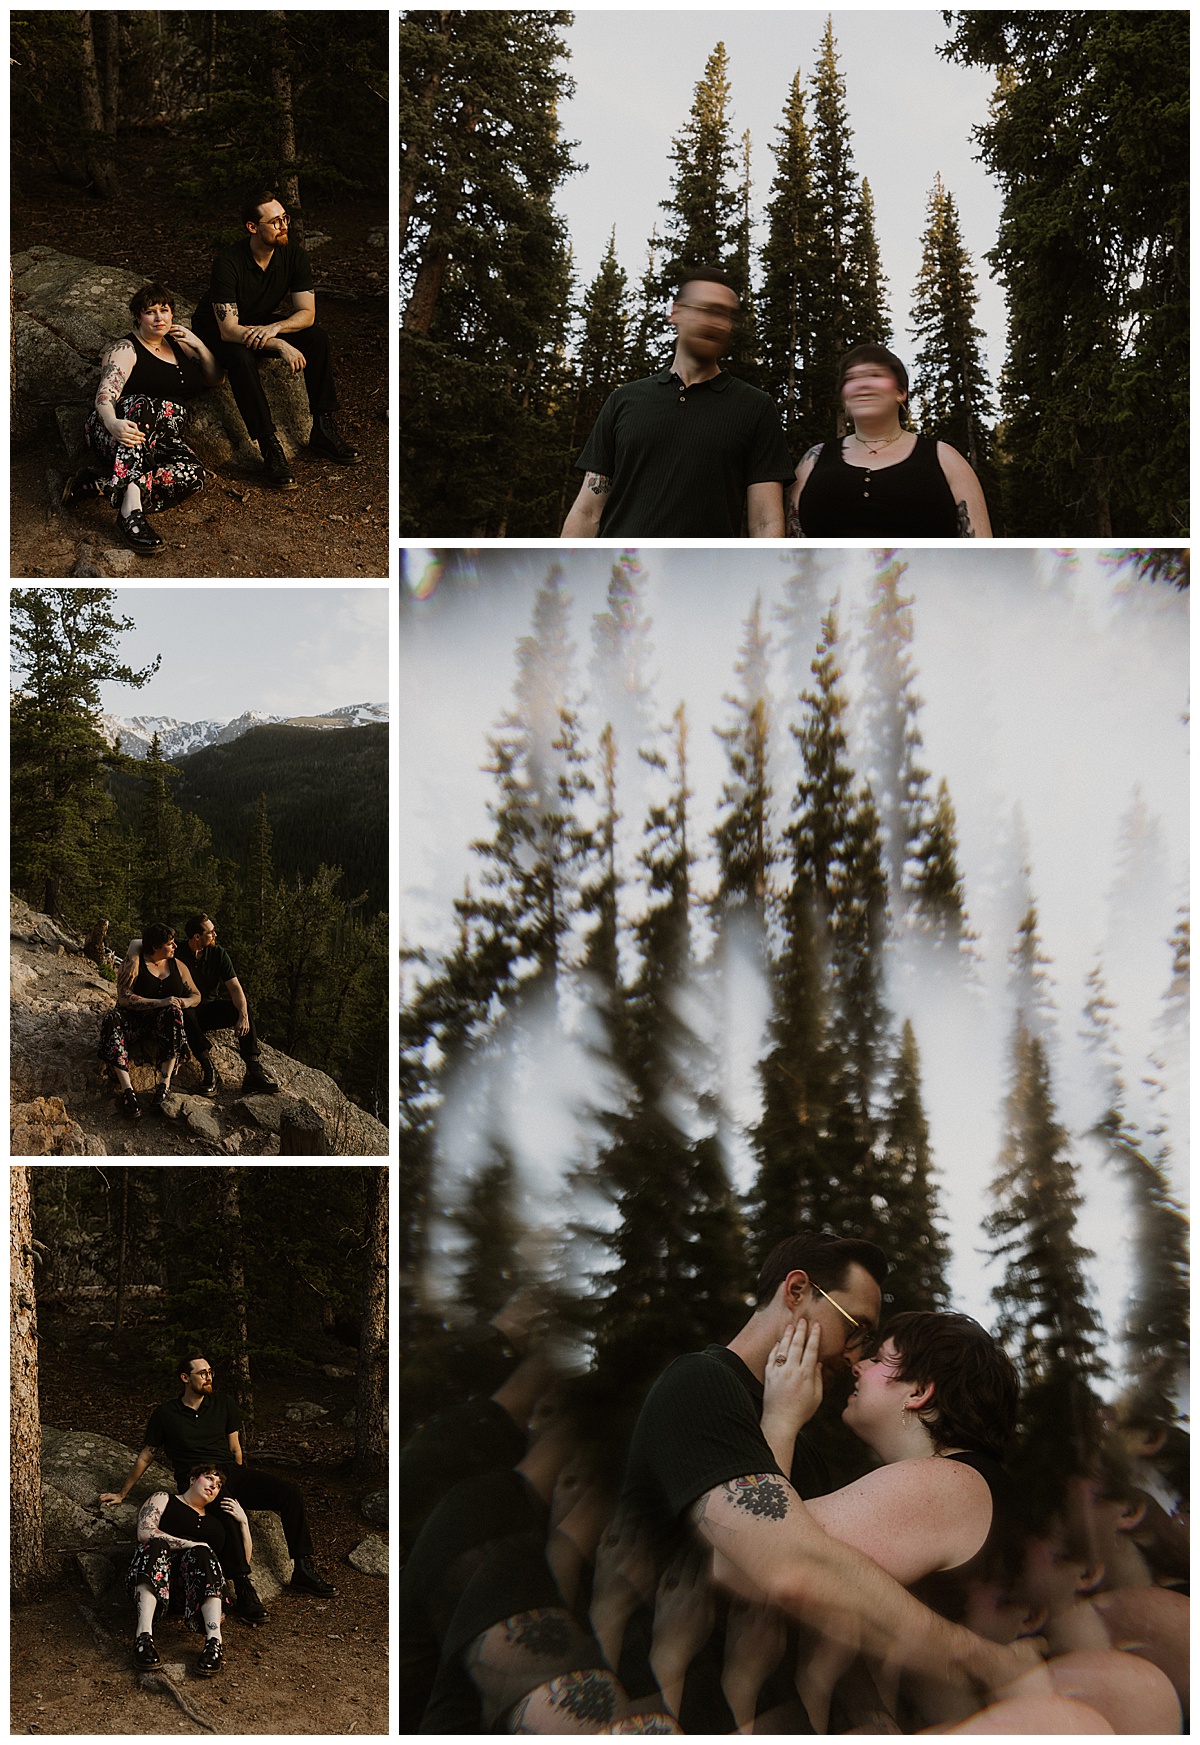 Photos of a couple in the woods